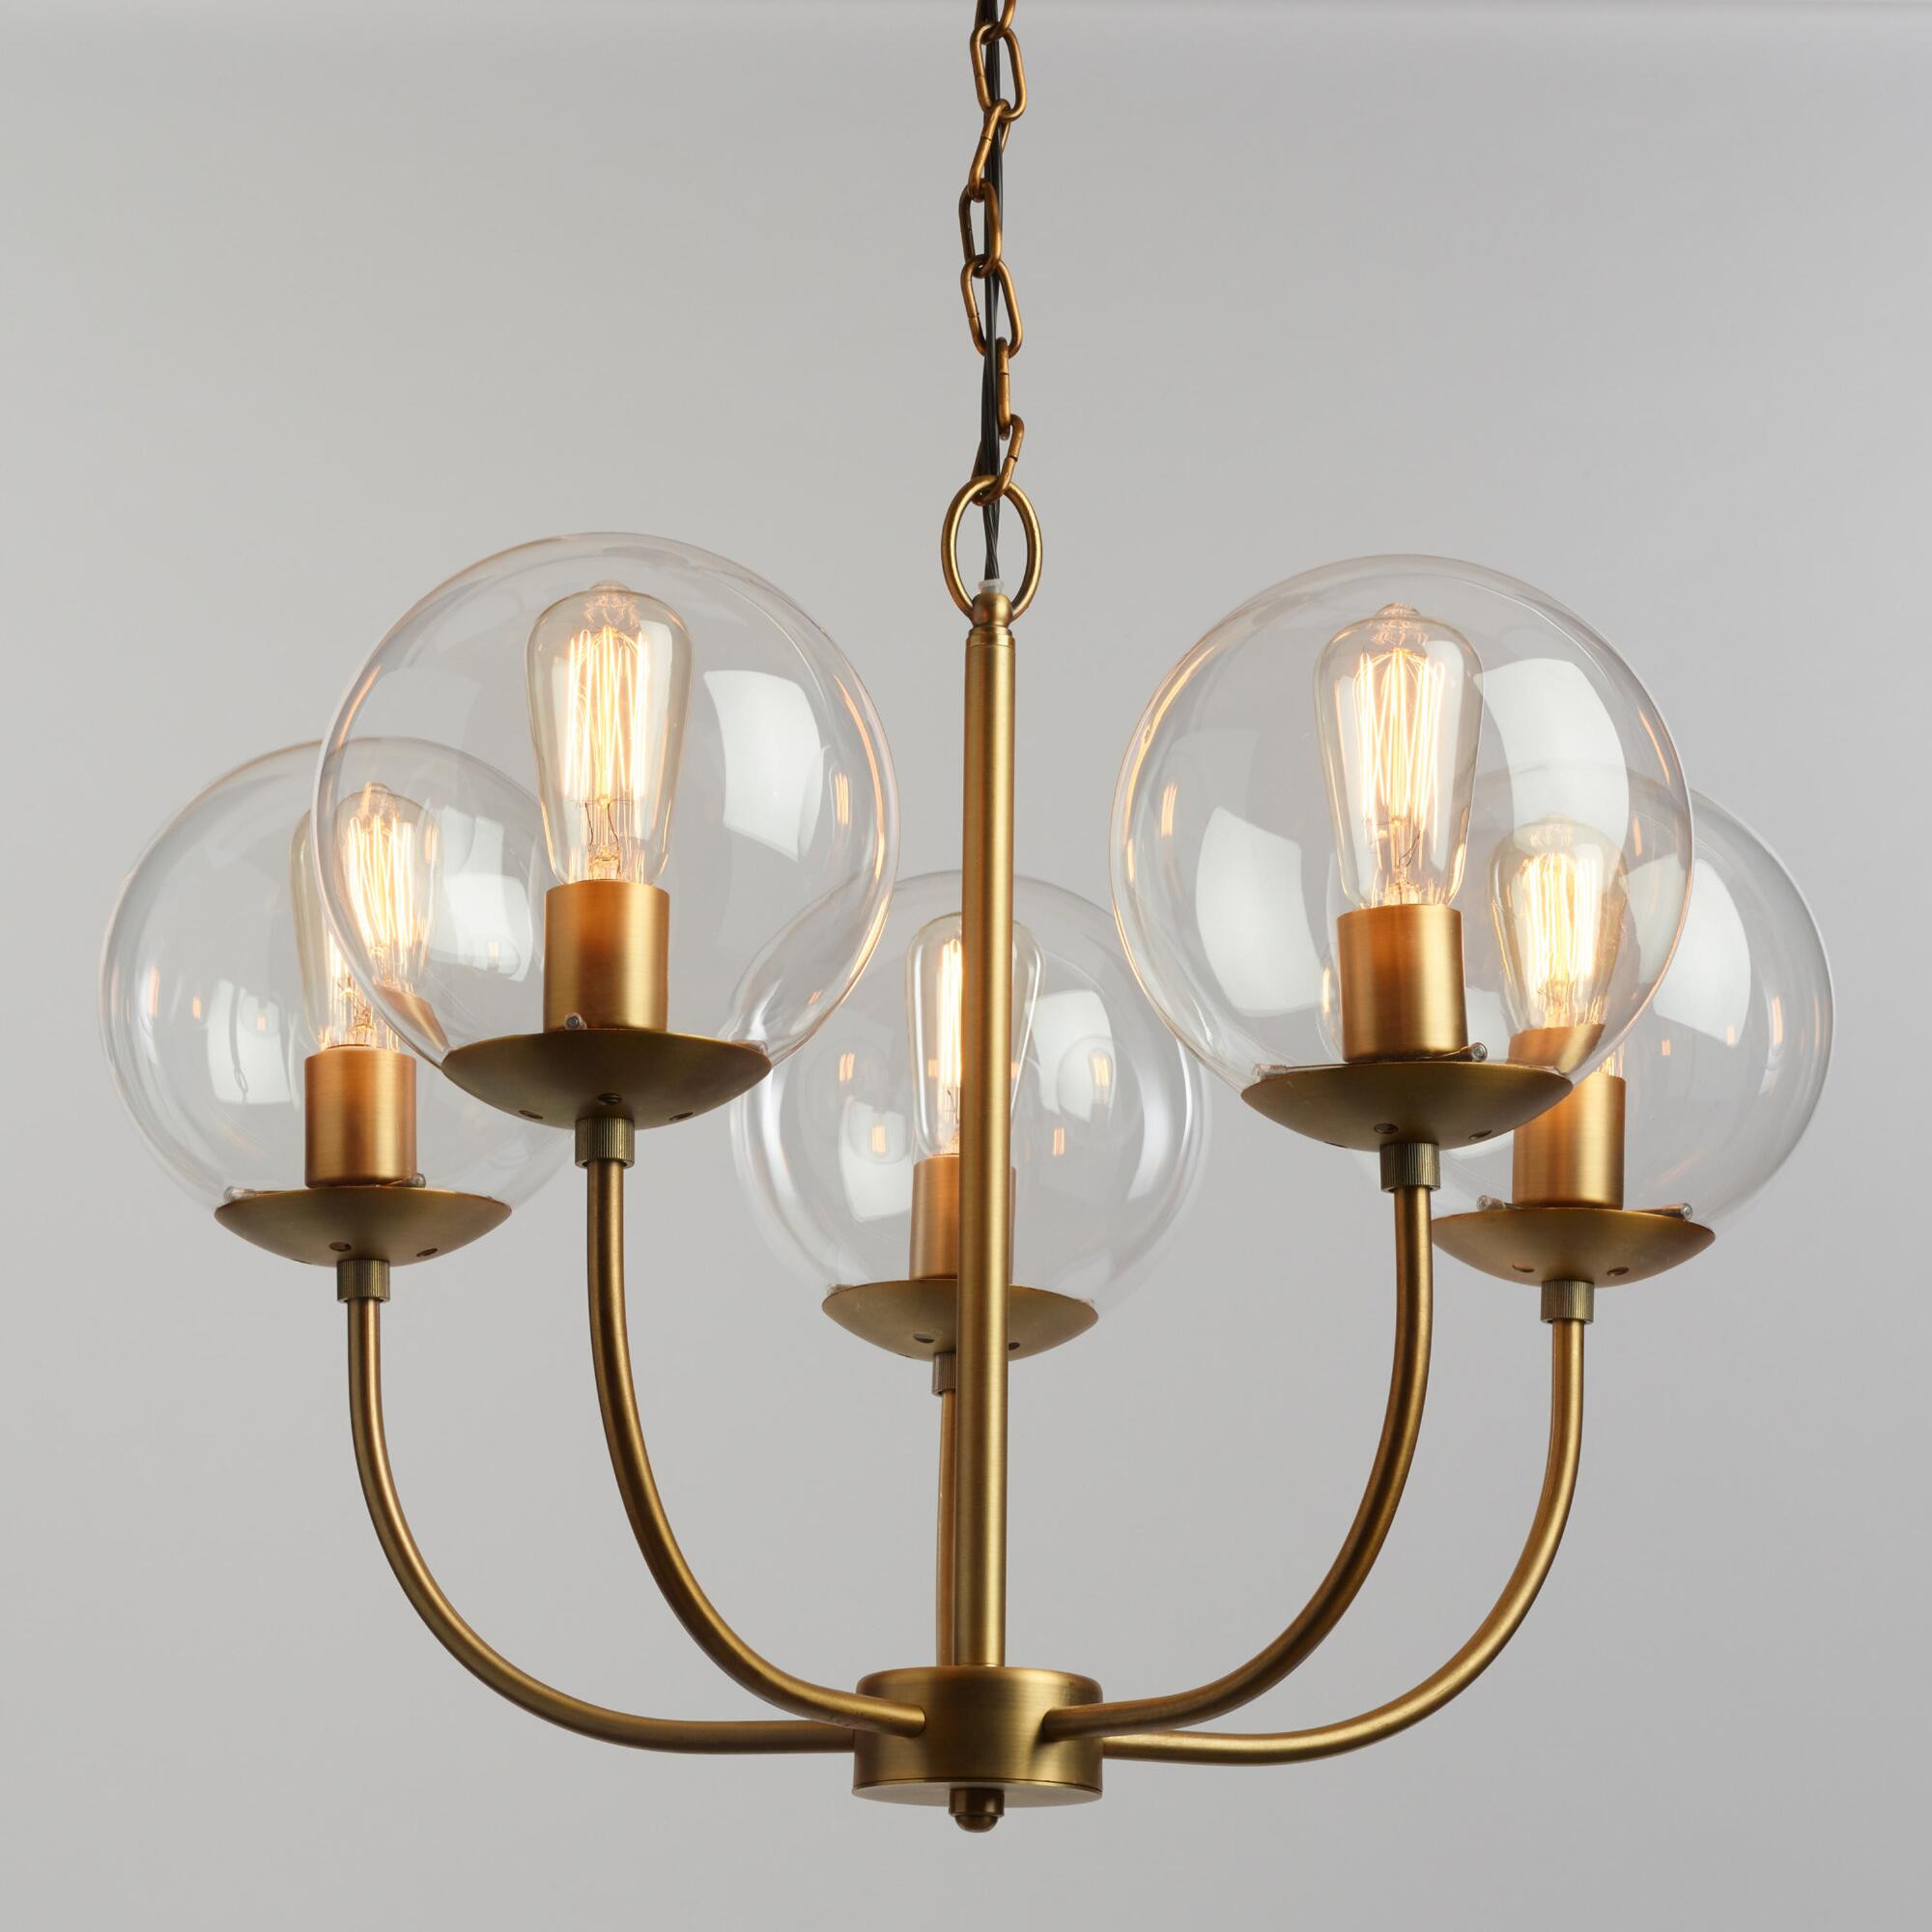 Best ideas about World Market Lighting
. Save or Pin Lighting World Market Now.